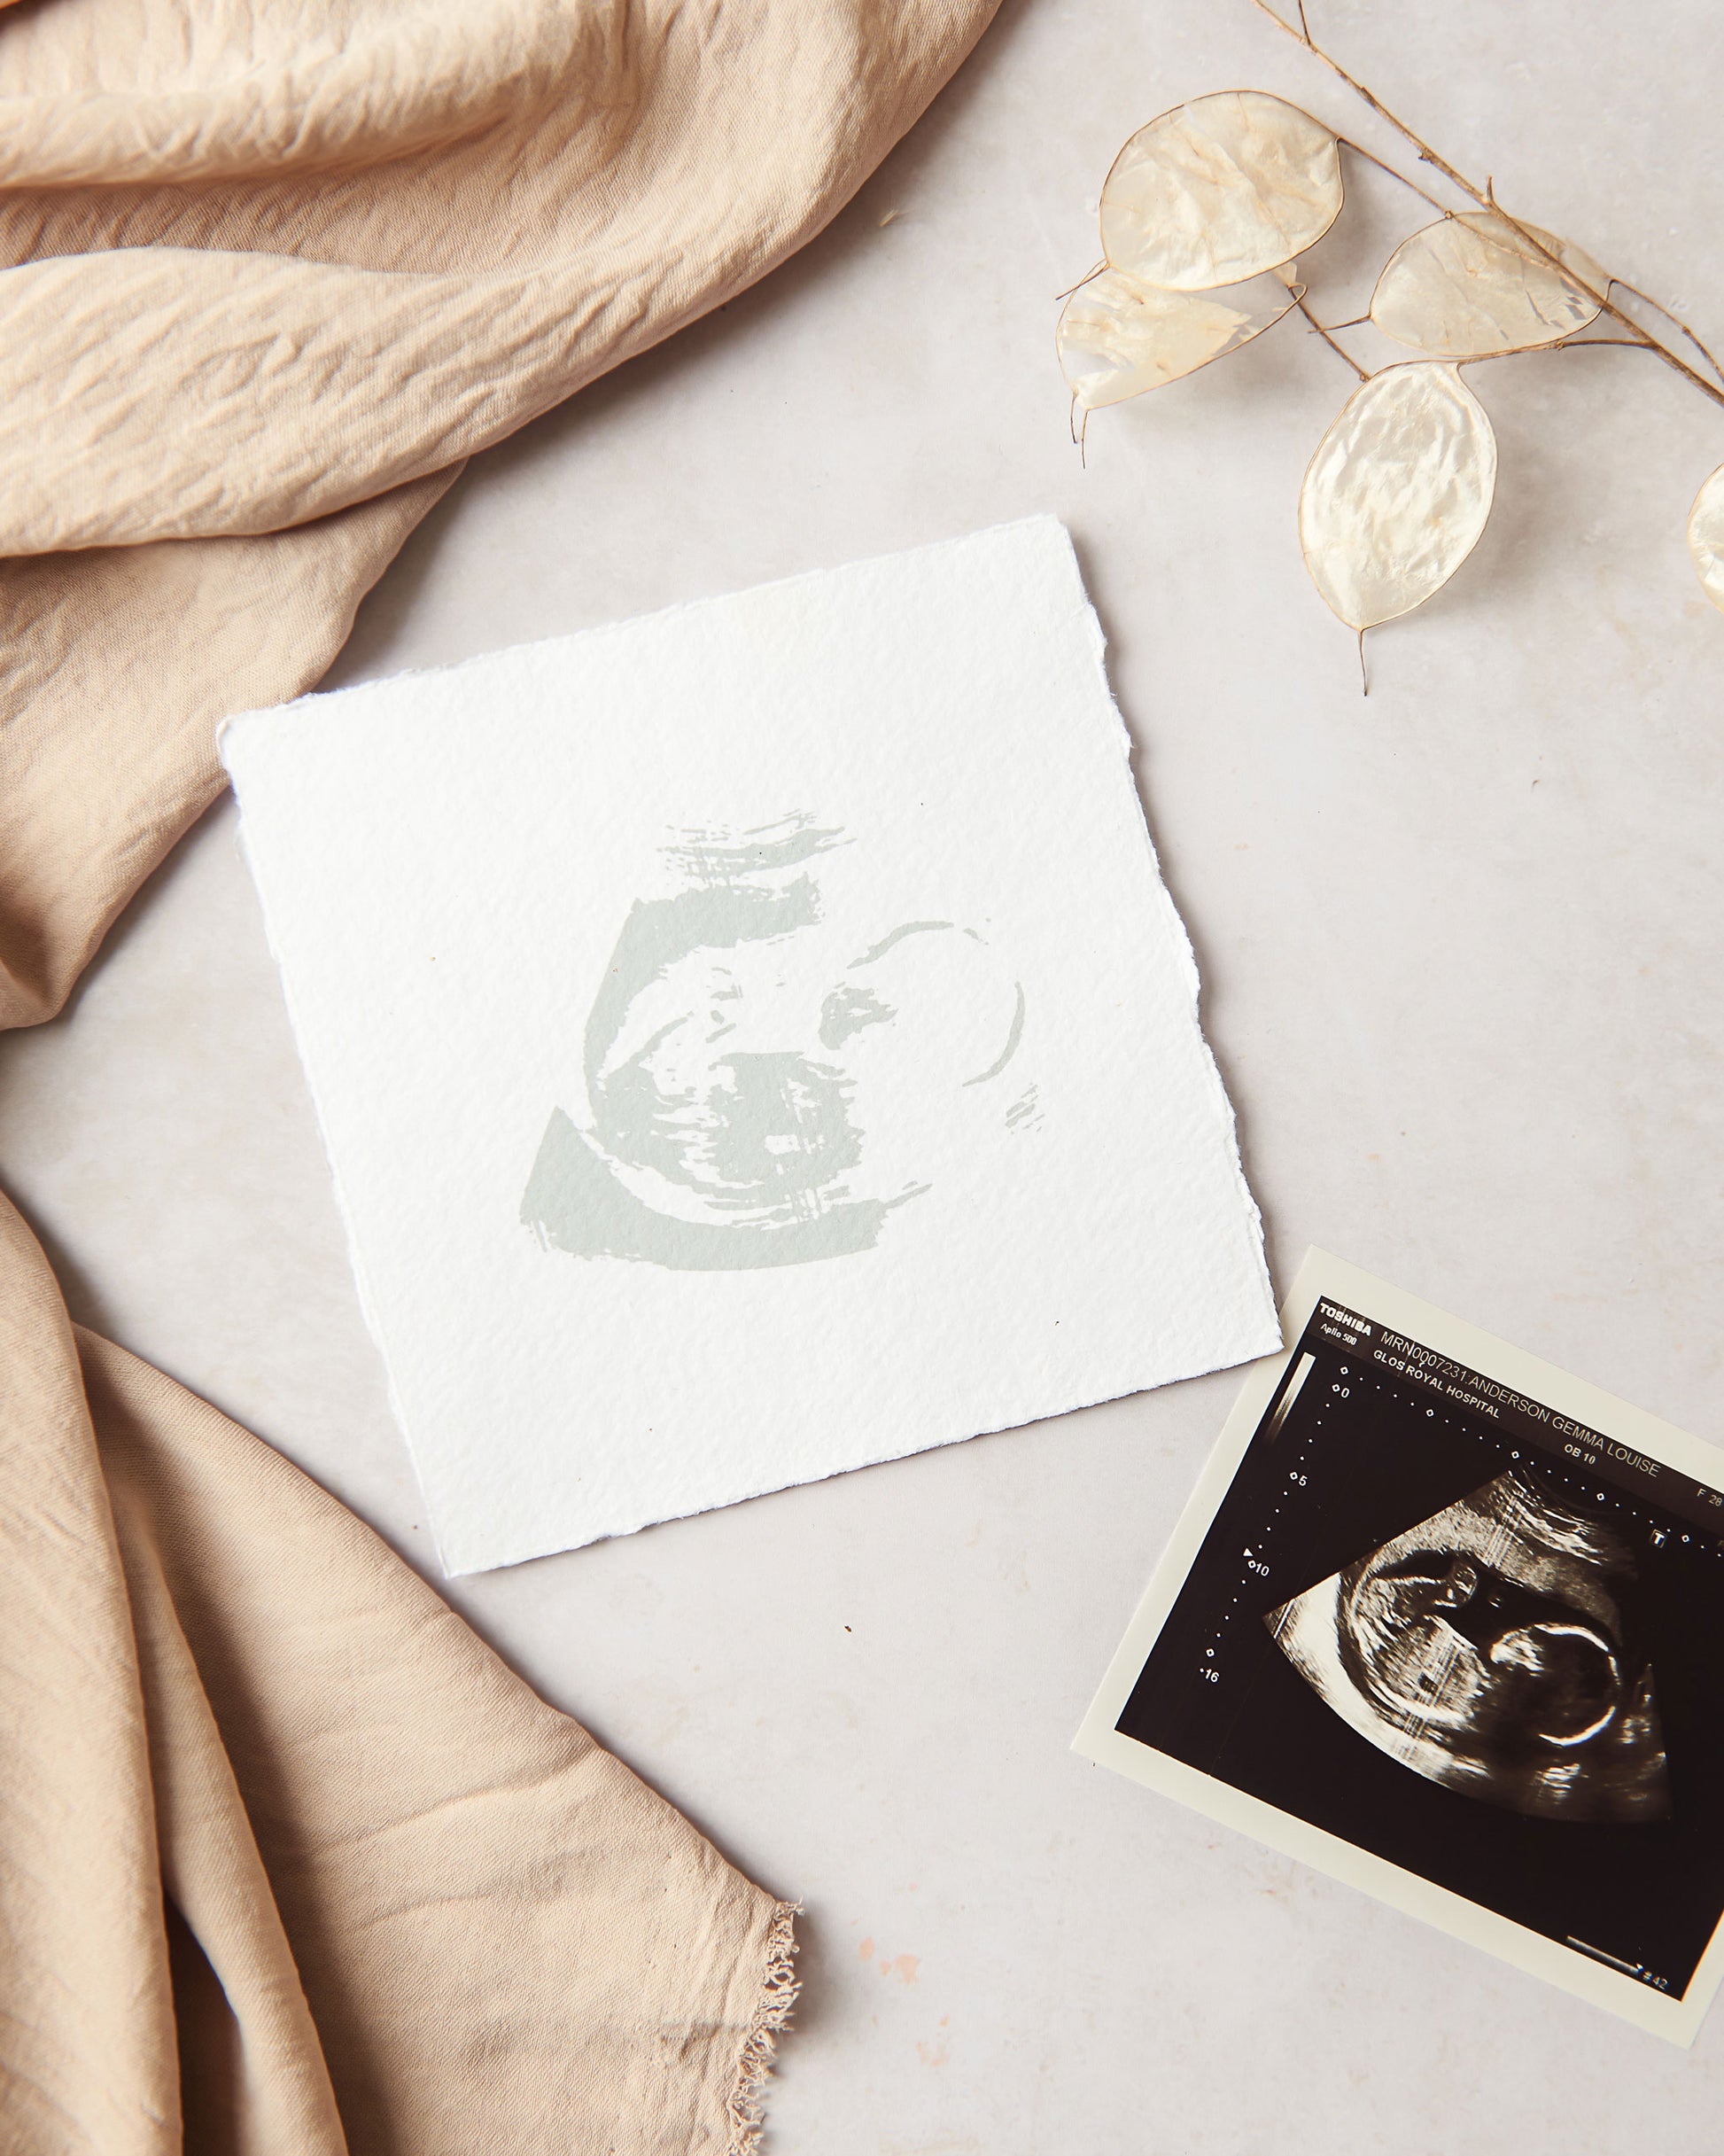 A photograph showing a handmade paper baby scan keepsake. The keepsake is appoximately 5 inches square and has the silhouette of the baby printed centrally in a light sage green ink, on to a natural handmade paper with its feathery deckle edges. Surrounding the keepsake in the photograph are the original scan to show the reference point along with fabric and a dried stem of lunaria honesty.